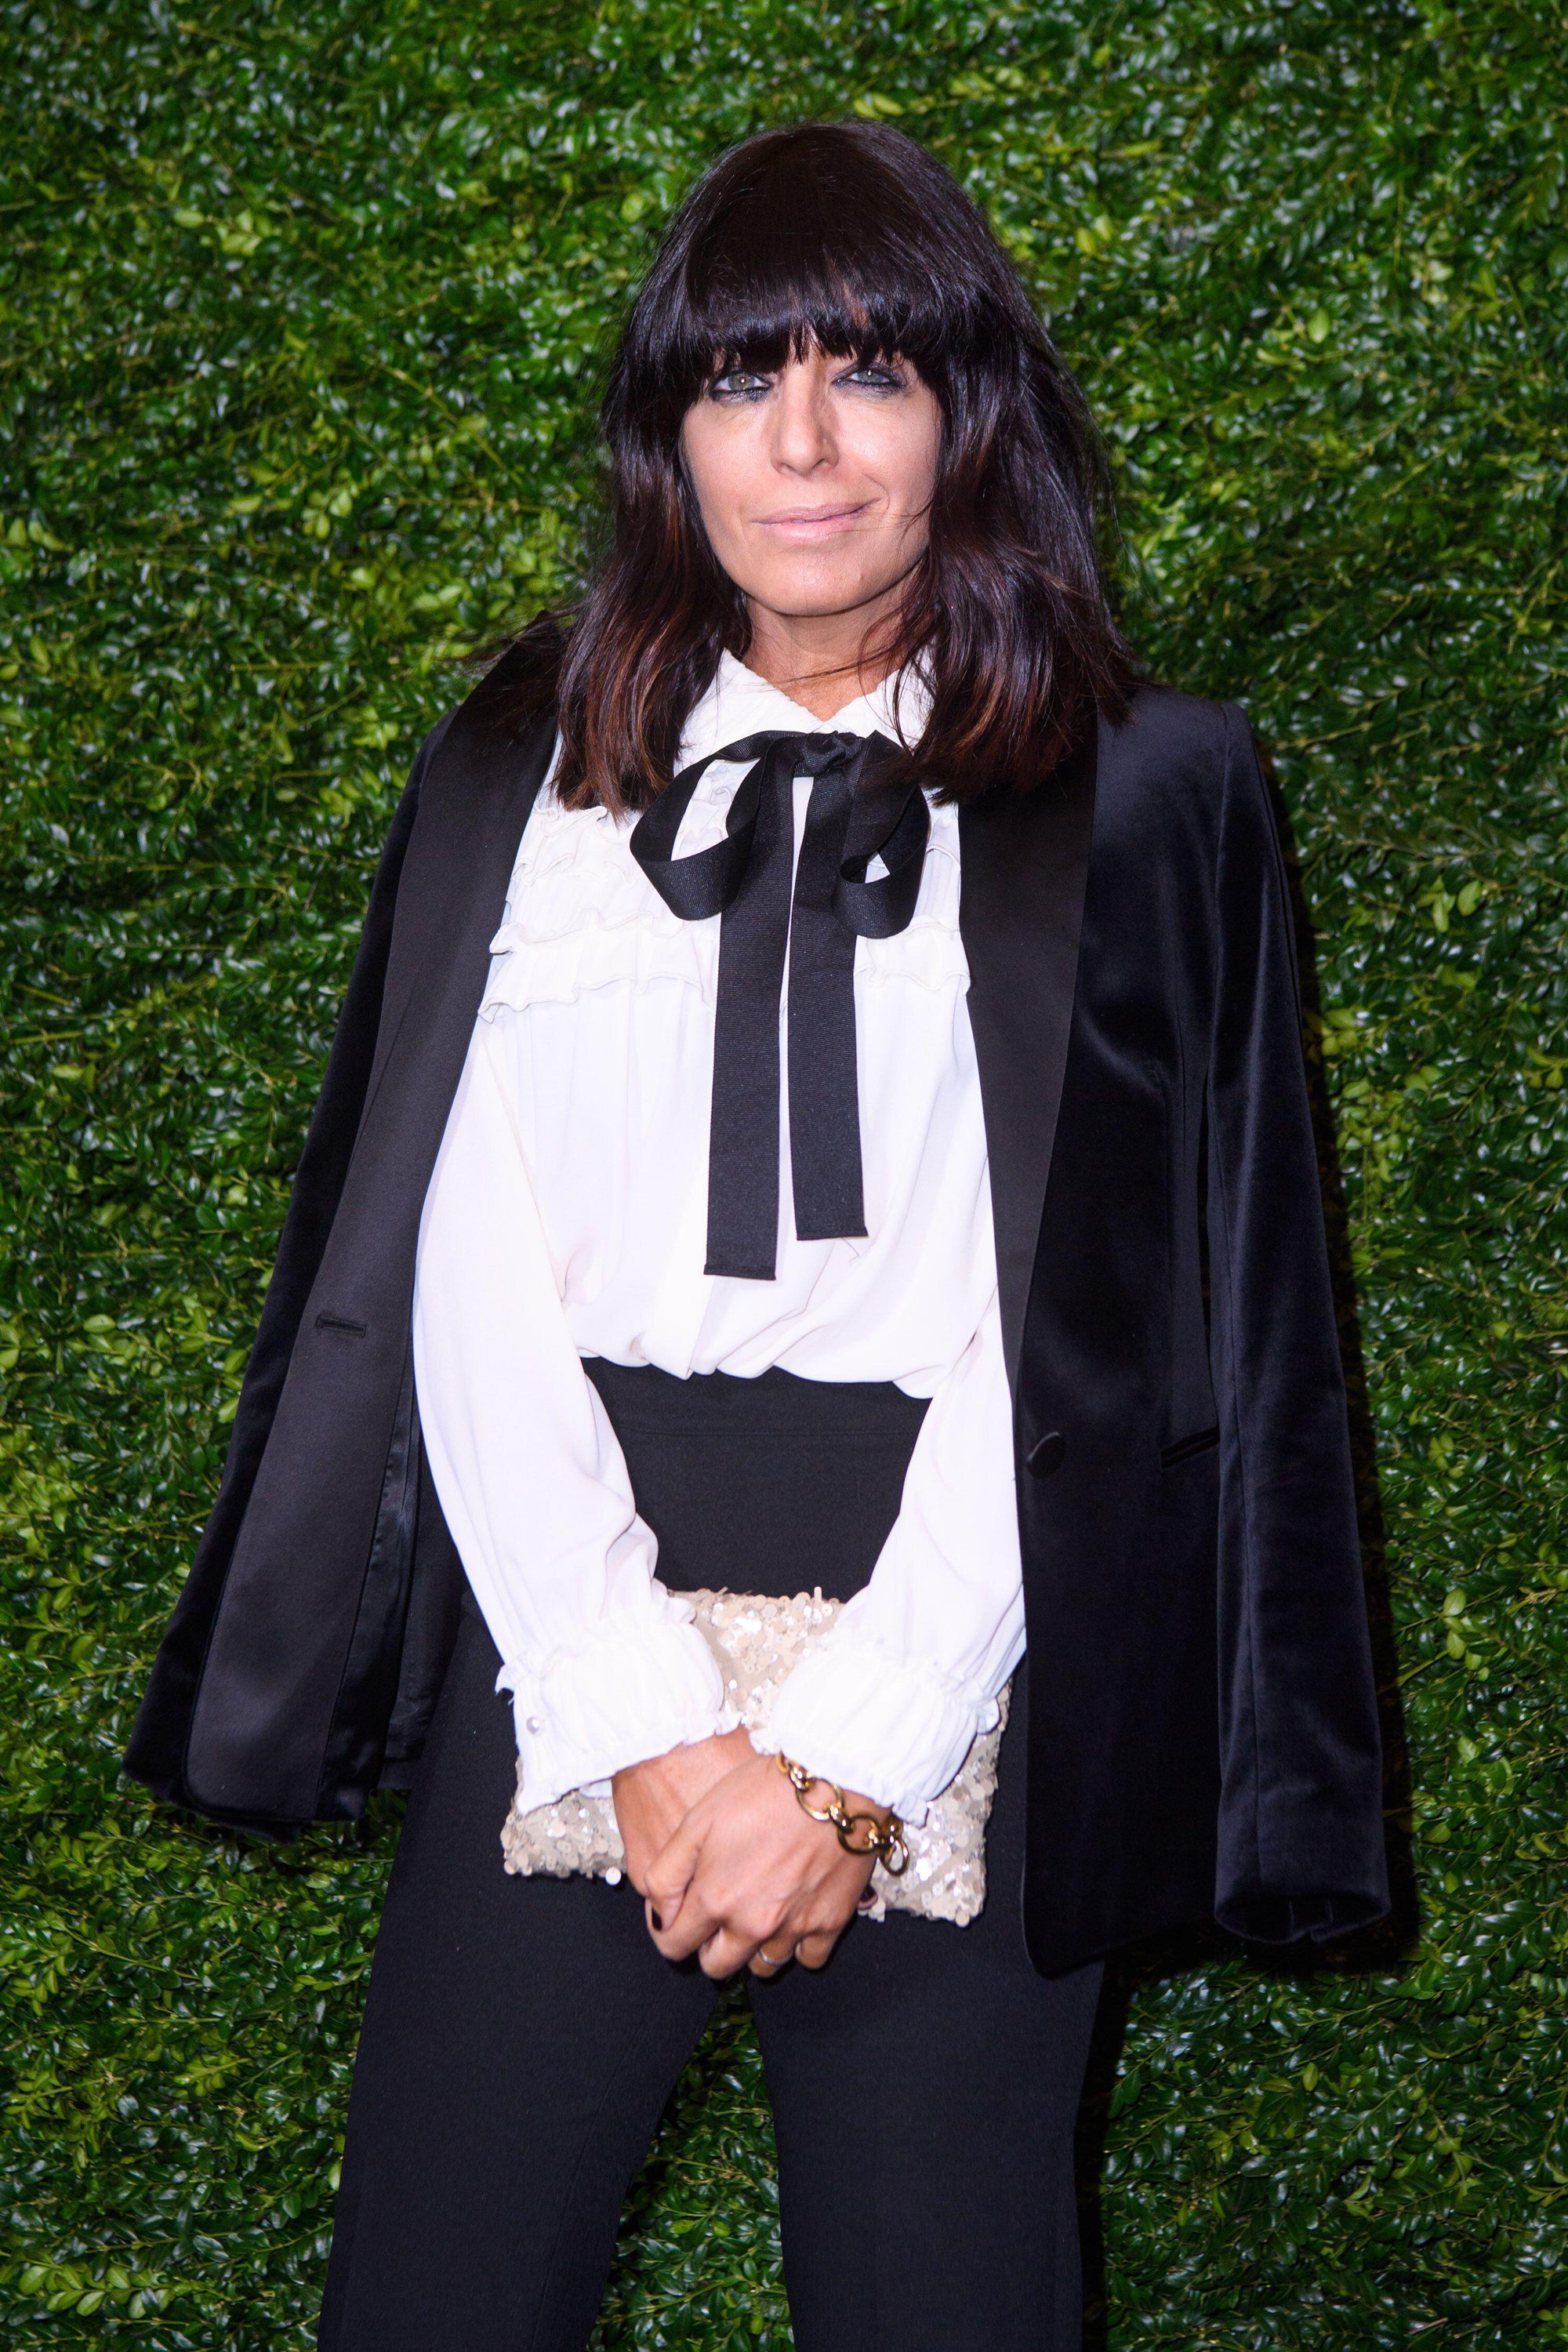 Claudia Winkleman arriving at the Charles Finch and Chanel pre-Bafta party